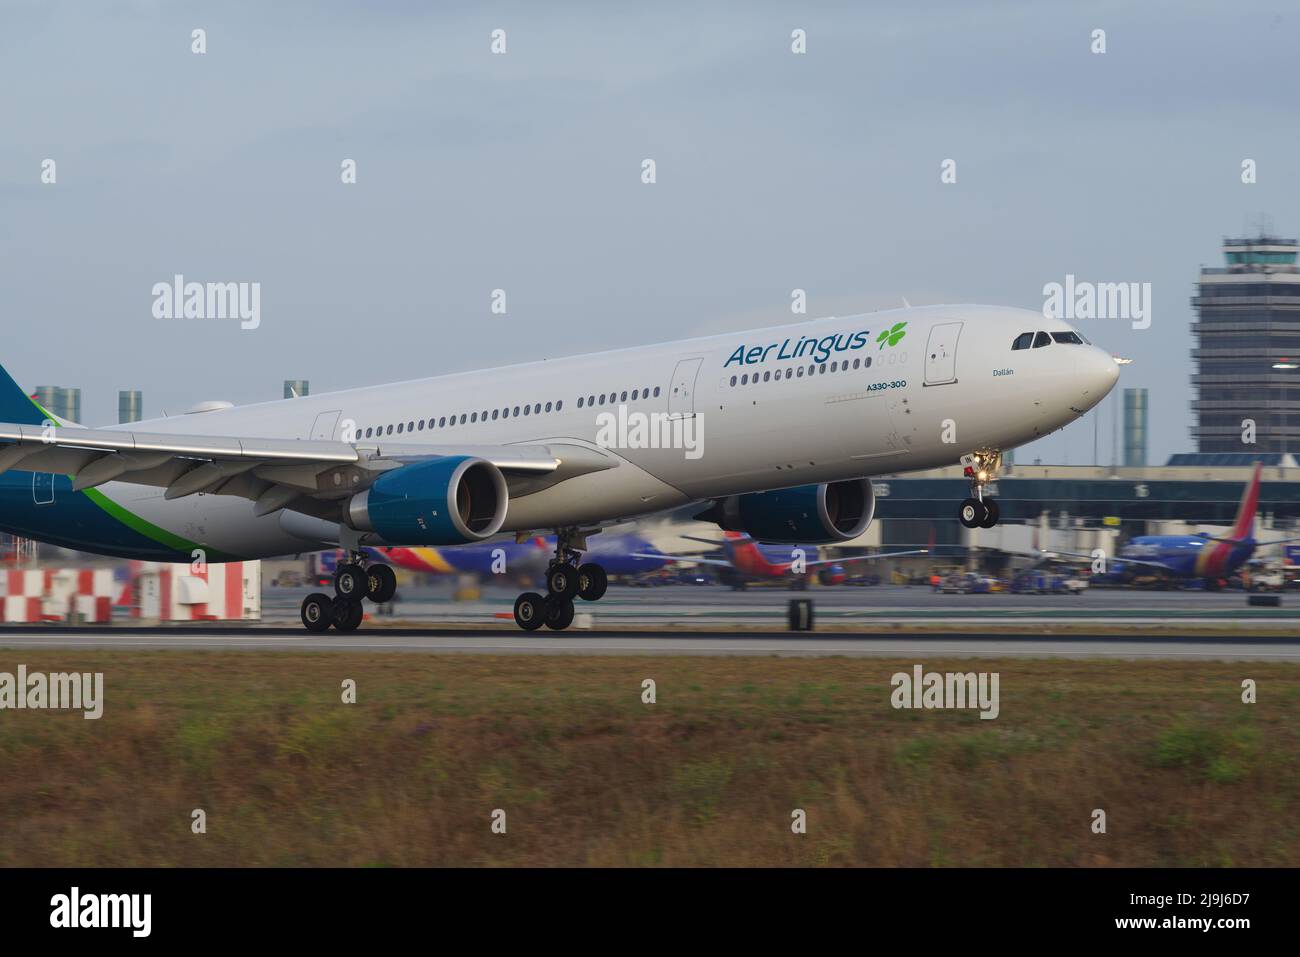 Image of Aer Lingus Airbus A330-300 with registration EI-EIN shown touching down at Los Angeles International Airport, LAX. Stock Photo